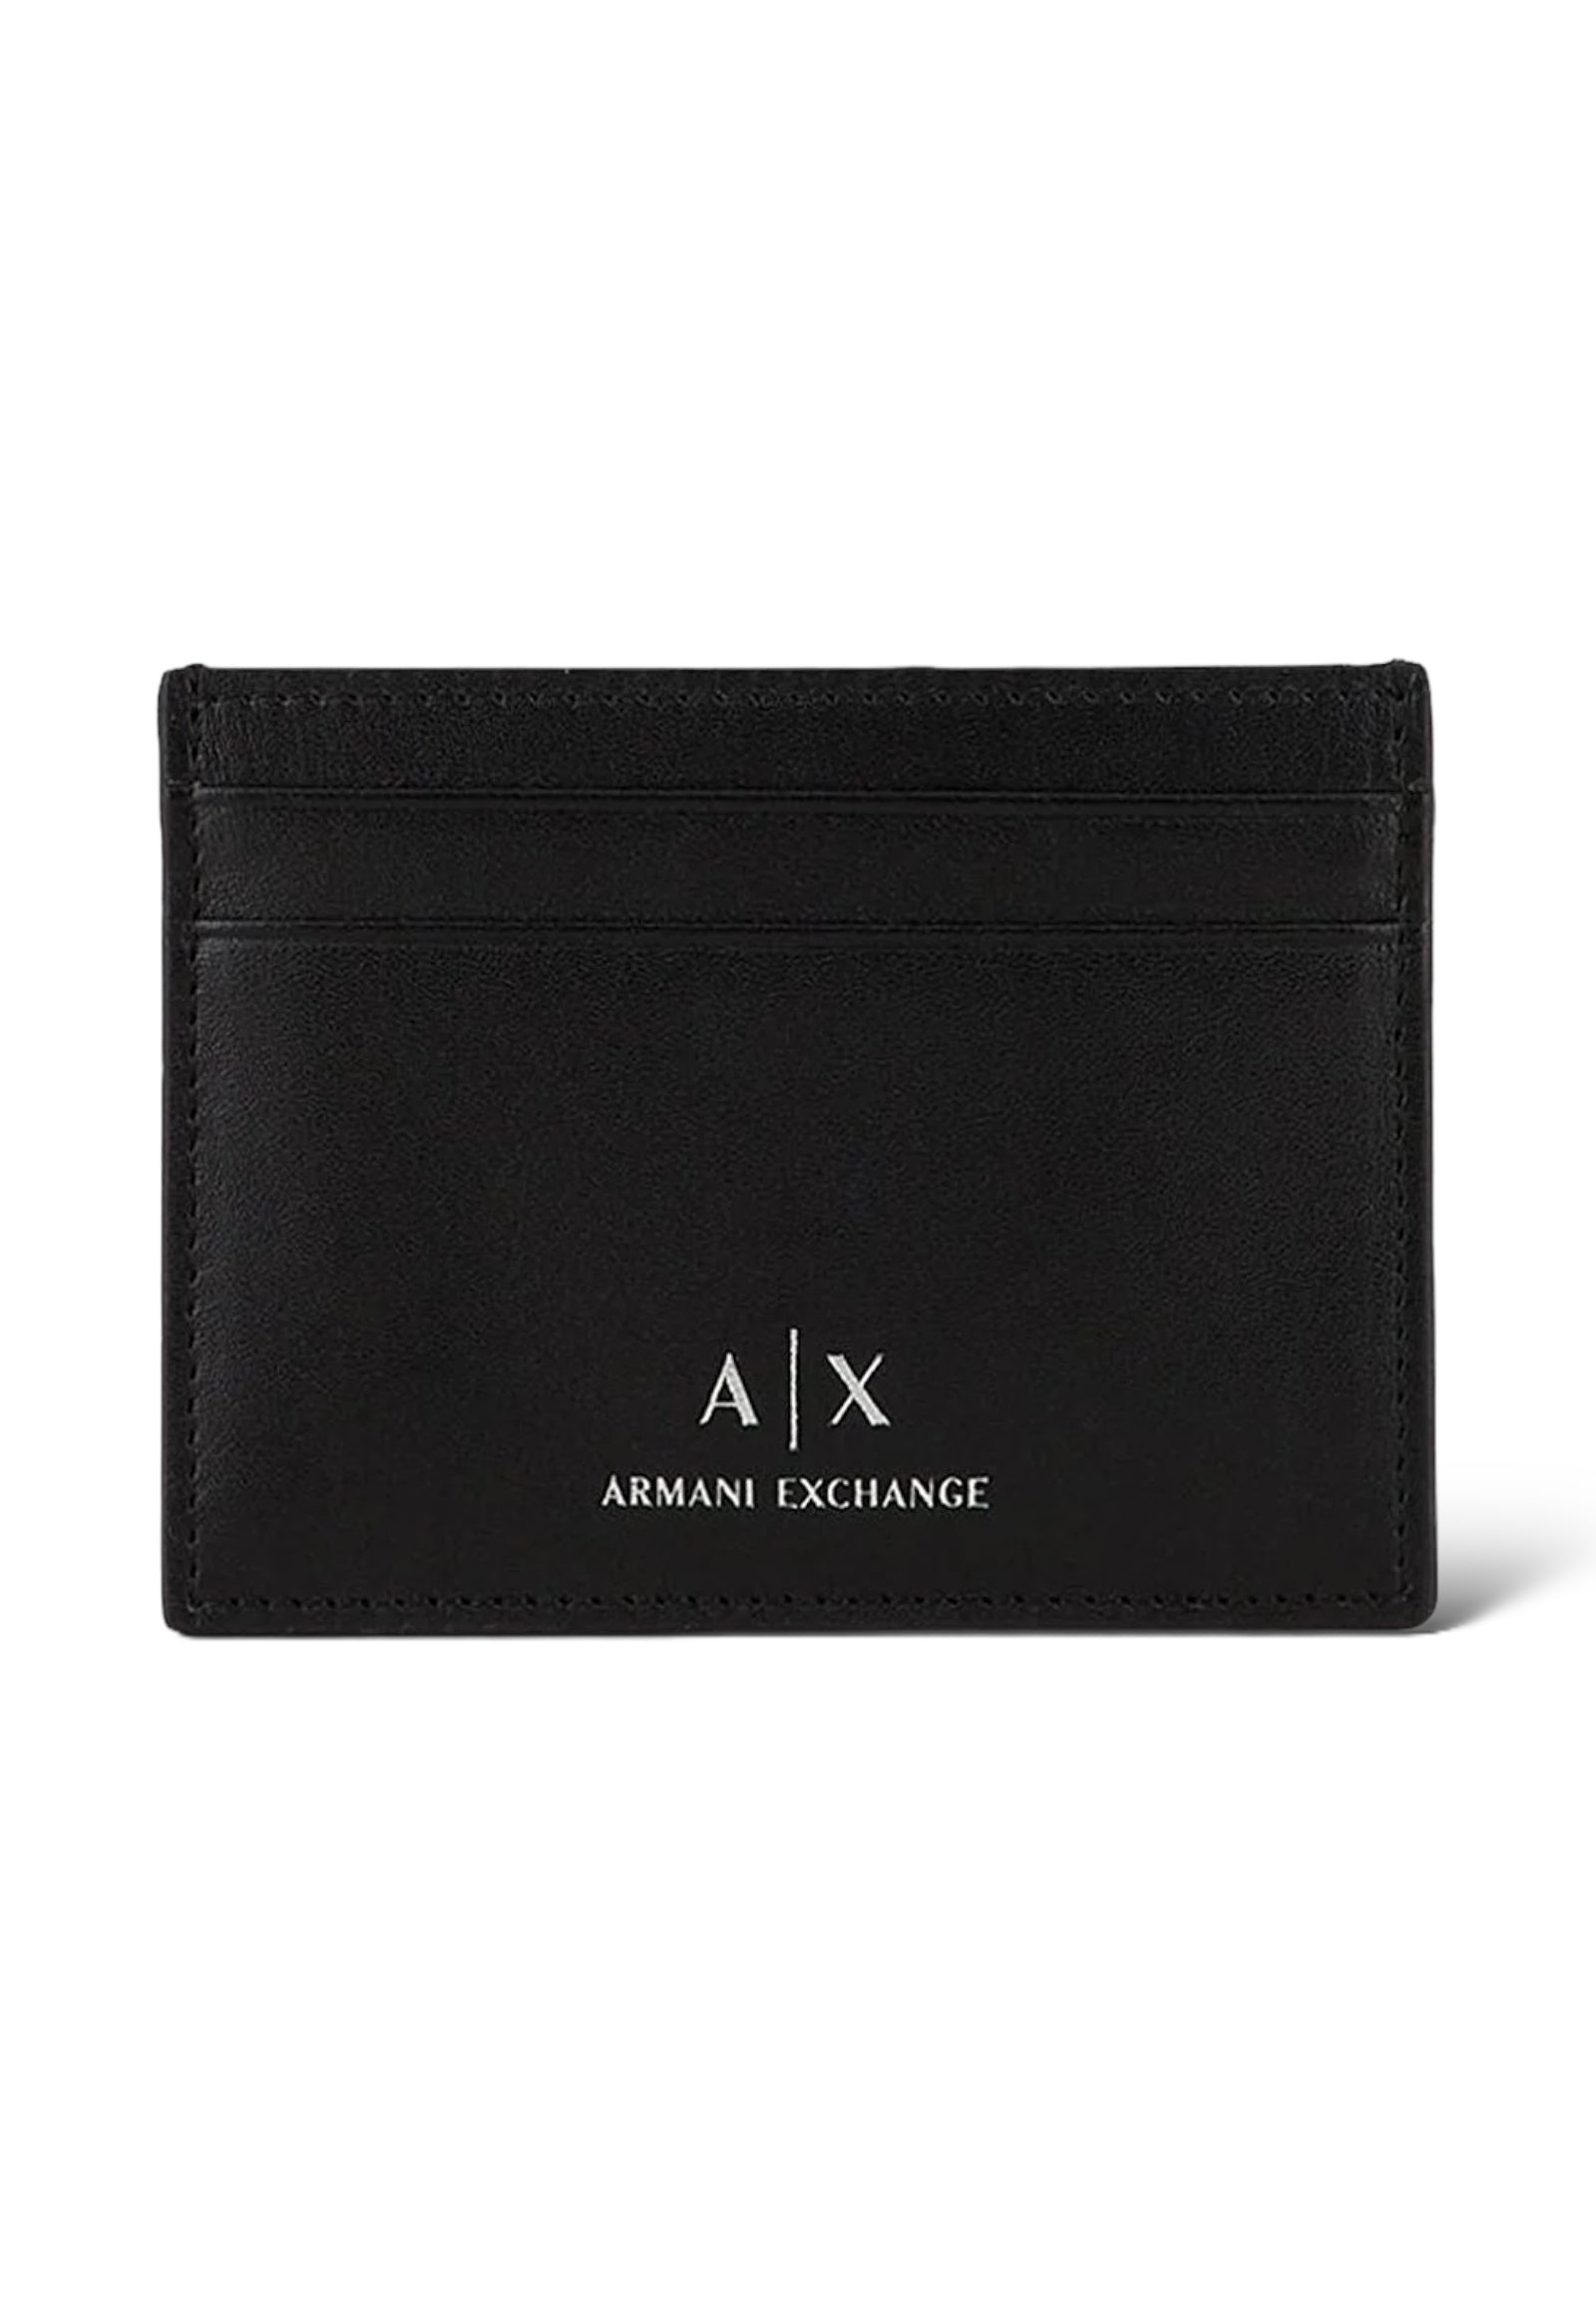 AX Armani Exchange | Clothing, footwear and accessories collection